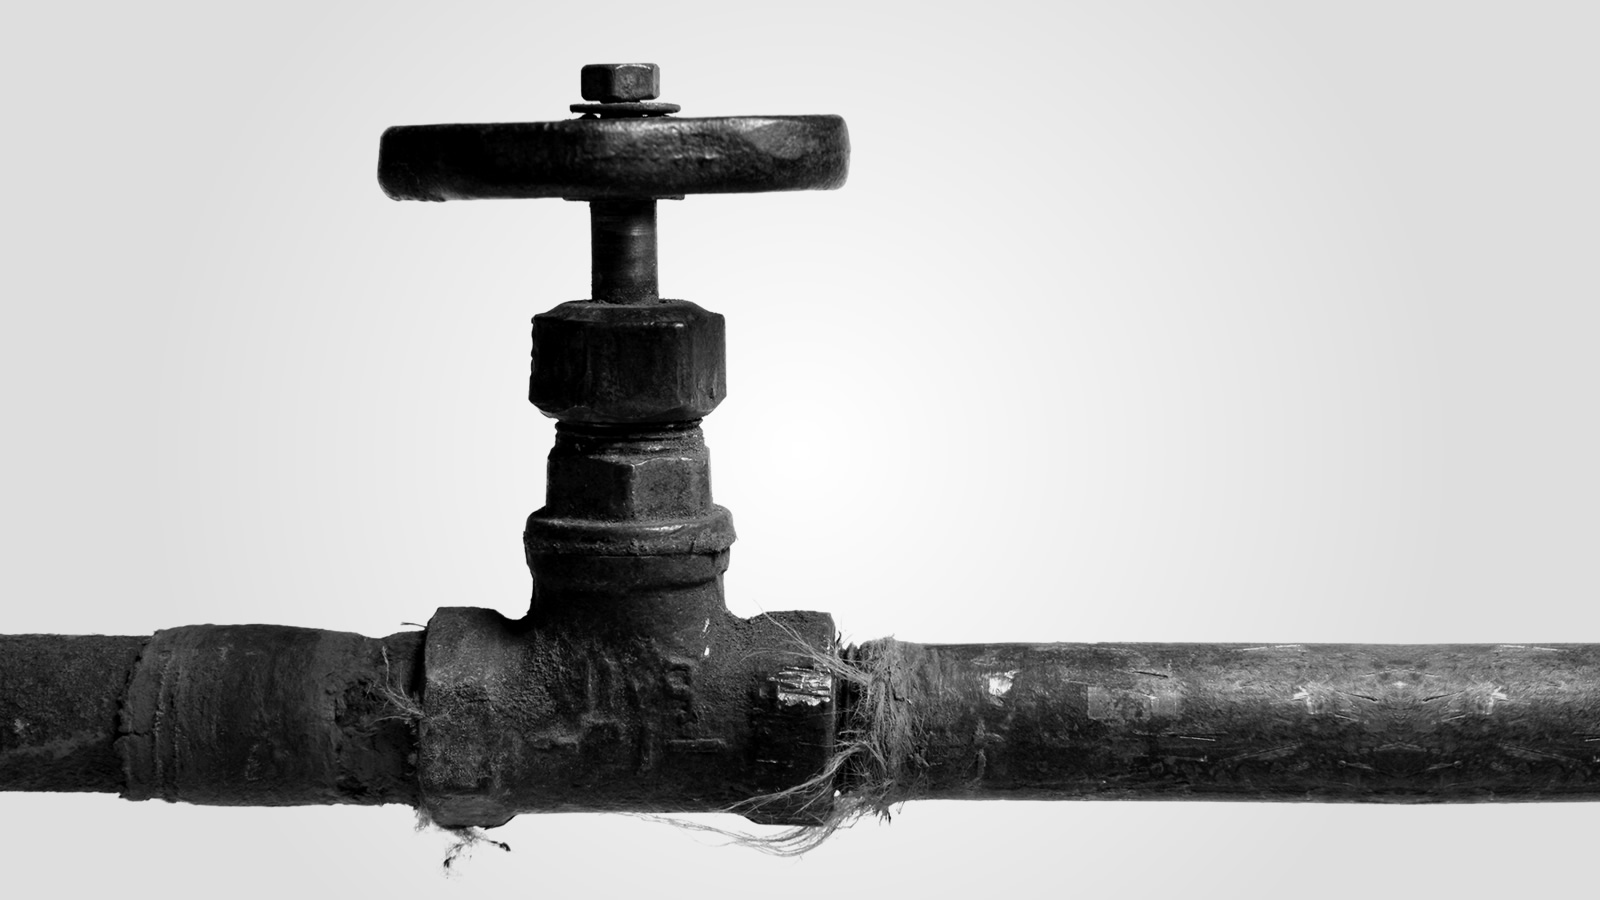 A shut-off valve on an old metal pipe